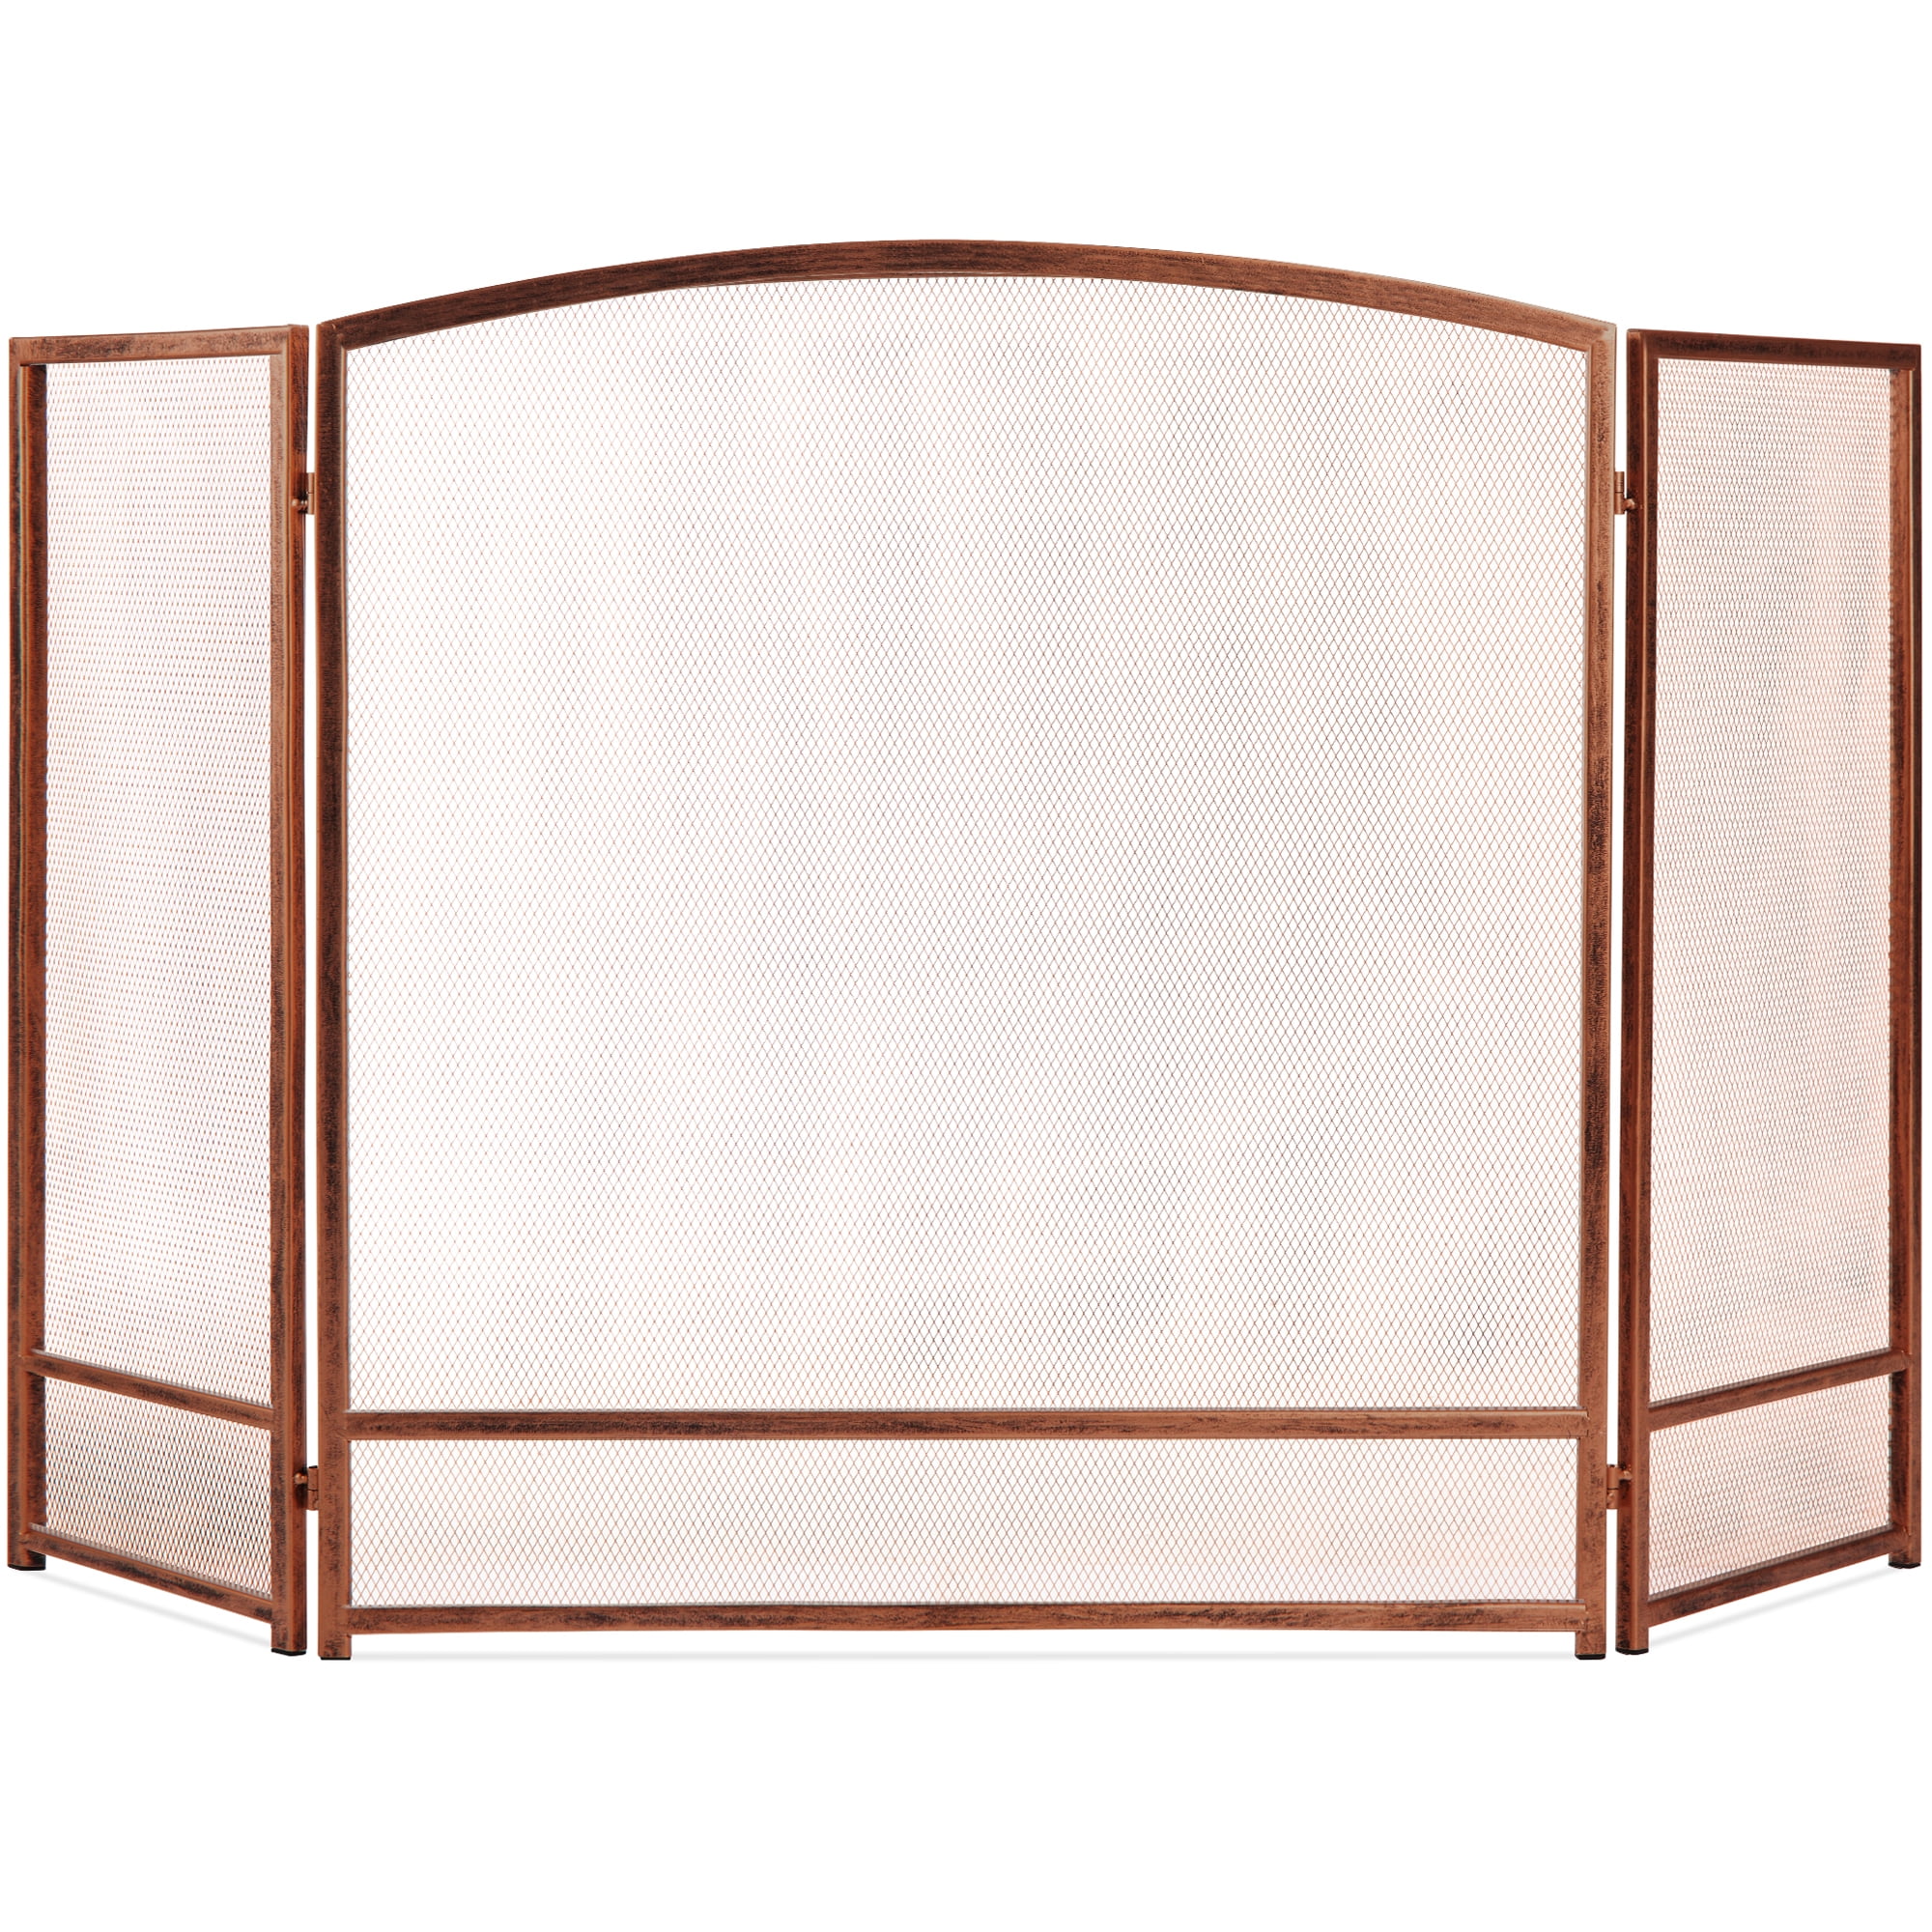 Best Choice Products 47x29in 3-Panel Steel Mesh Fireplace Screen, Spark Guard w/ Rustic Worn Finish - Copper